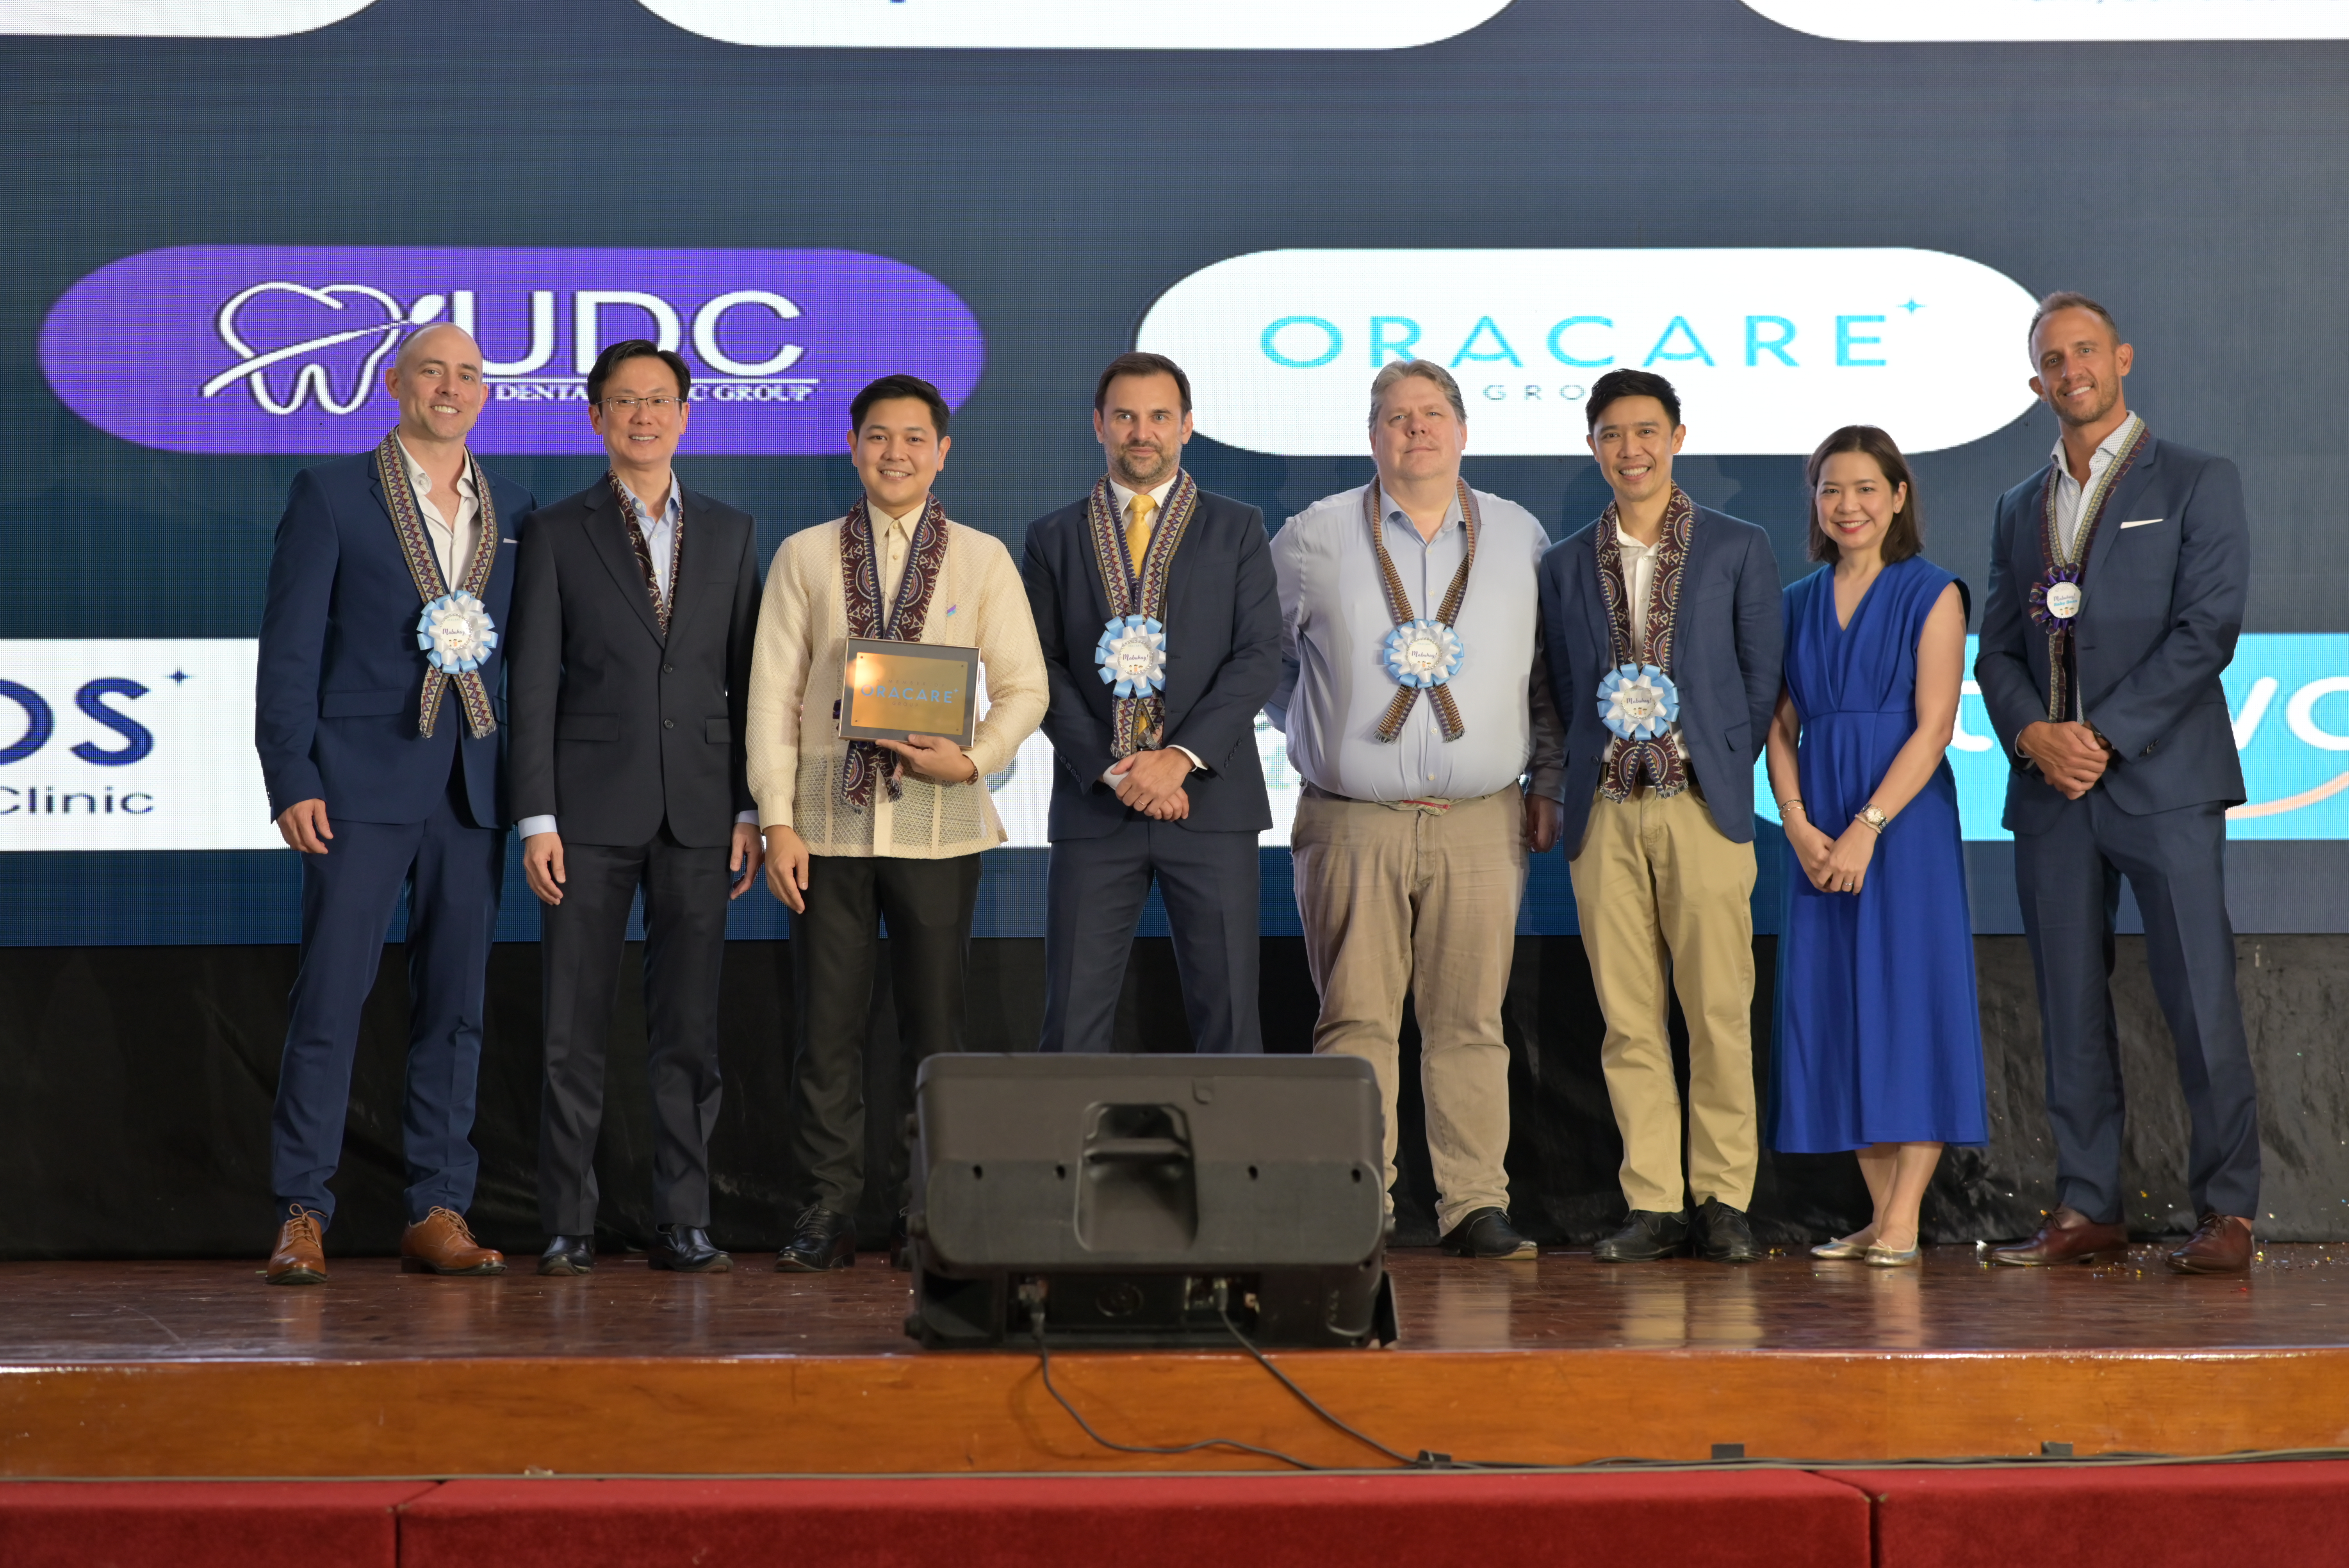 Leaders of the dental brands in the Oracare family at the Oracare-UDC celebration event on 27 October 2023 in Manila, the Philippines. <br>From left: Dr Matt Thompson, Co-founder and Clinical Director – Expat Dental; Leon Luai, Co-founder and CEO – Oracare Group; Dr Charlston Uy, Founder and CEO – UDC; Andy Cropp, Co-founder and Chief Financial Officer – Oracare Group; Nick Watkins, Non-Executive Chairman –  Oracare Group; Dr Adisorn Hanworawong, Founder and CEO – MOS Dental; Dr Paega Jarungidanan, Clinical Director – MOS Dental; Dr Shaun Thompson, Founder and Managing Director –  Expat Dental.<br>